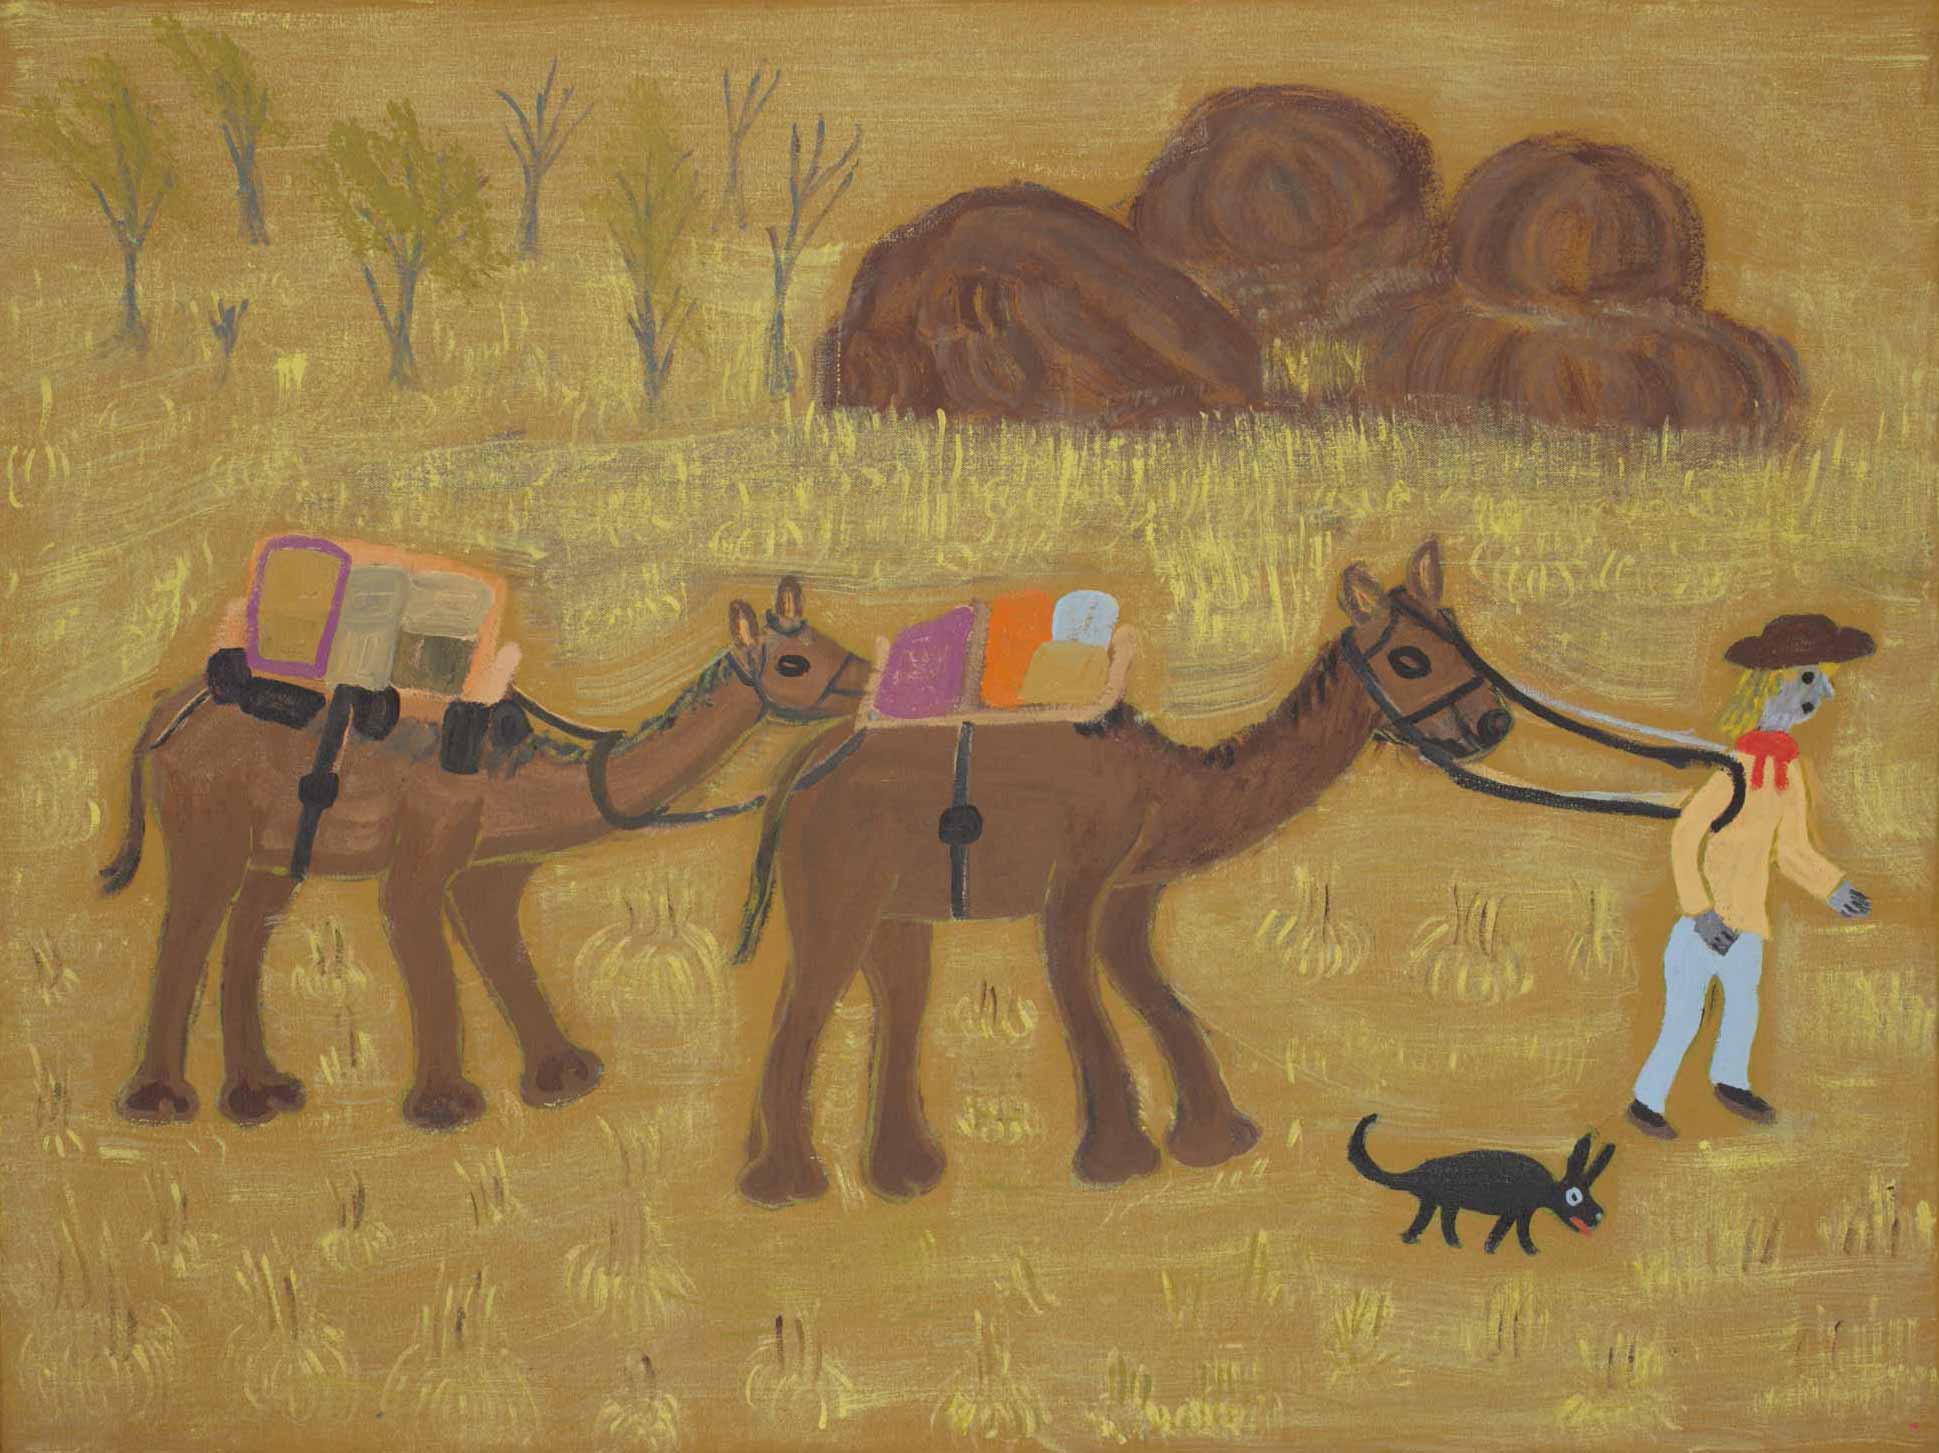 An acrylic painting on canvas showing a person leading two camels, against a predominantly yellow background. A small animal is running alongside the person.